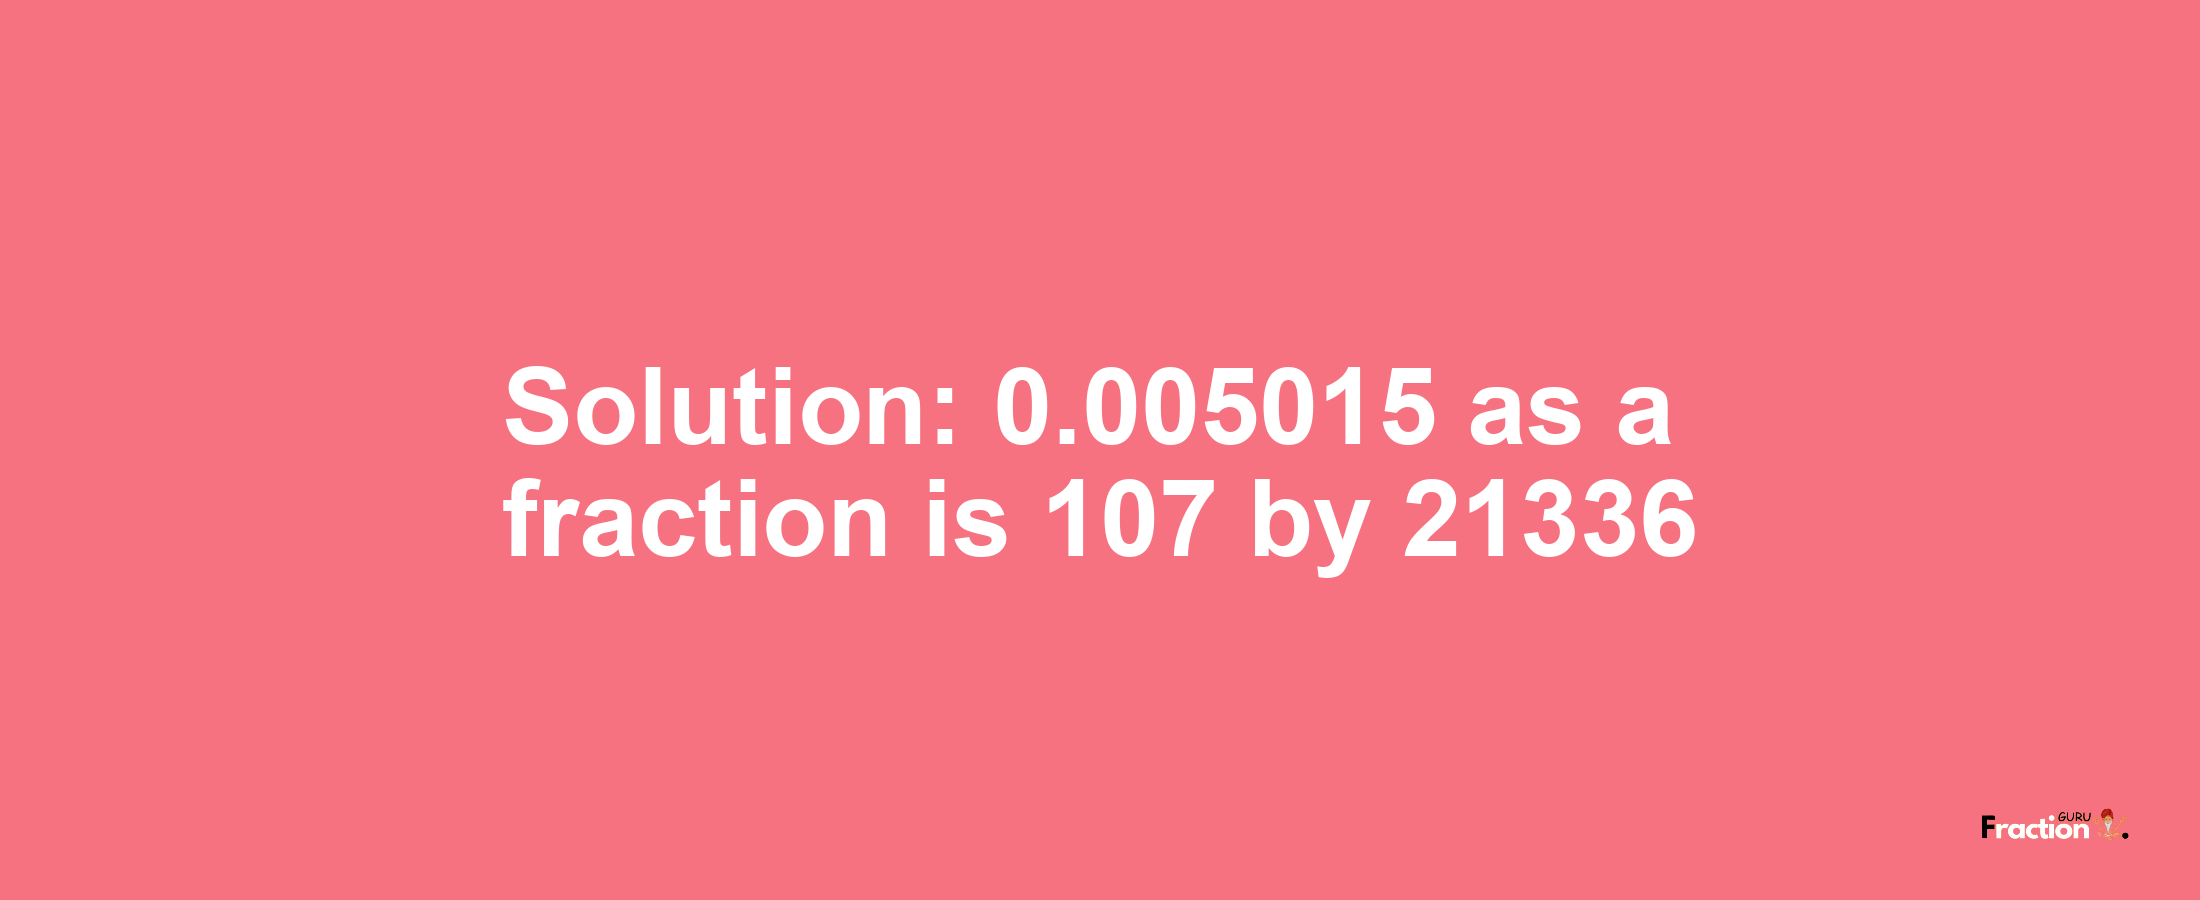 Solution:0.005015 as a fraction is 107/21336